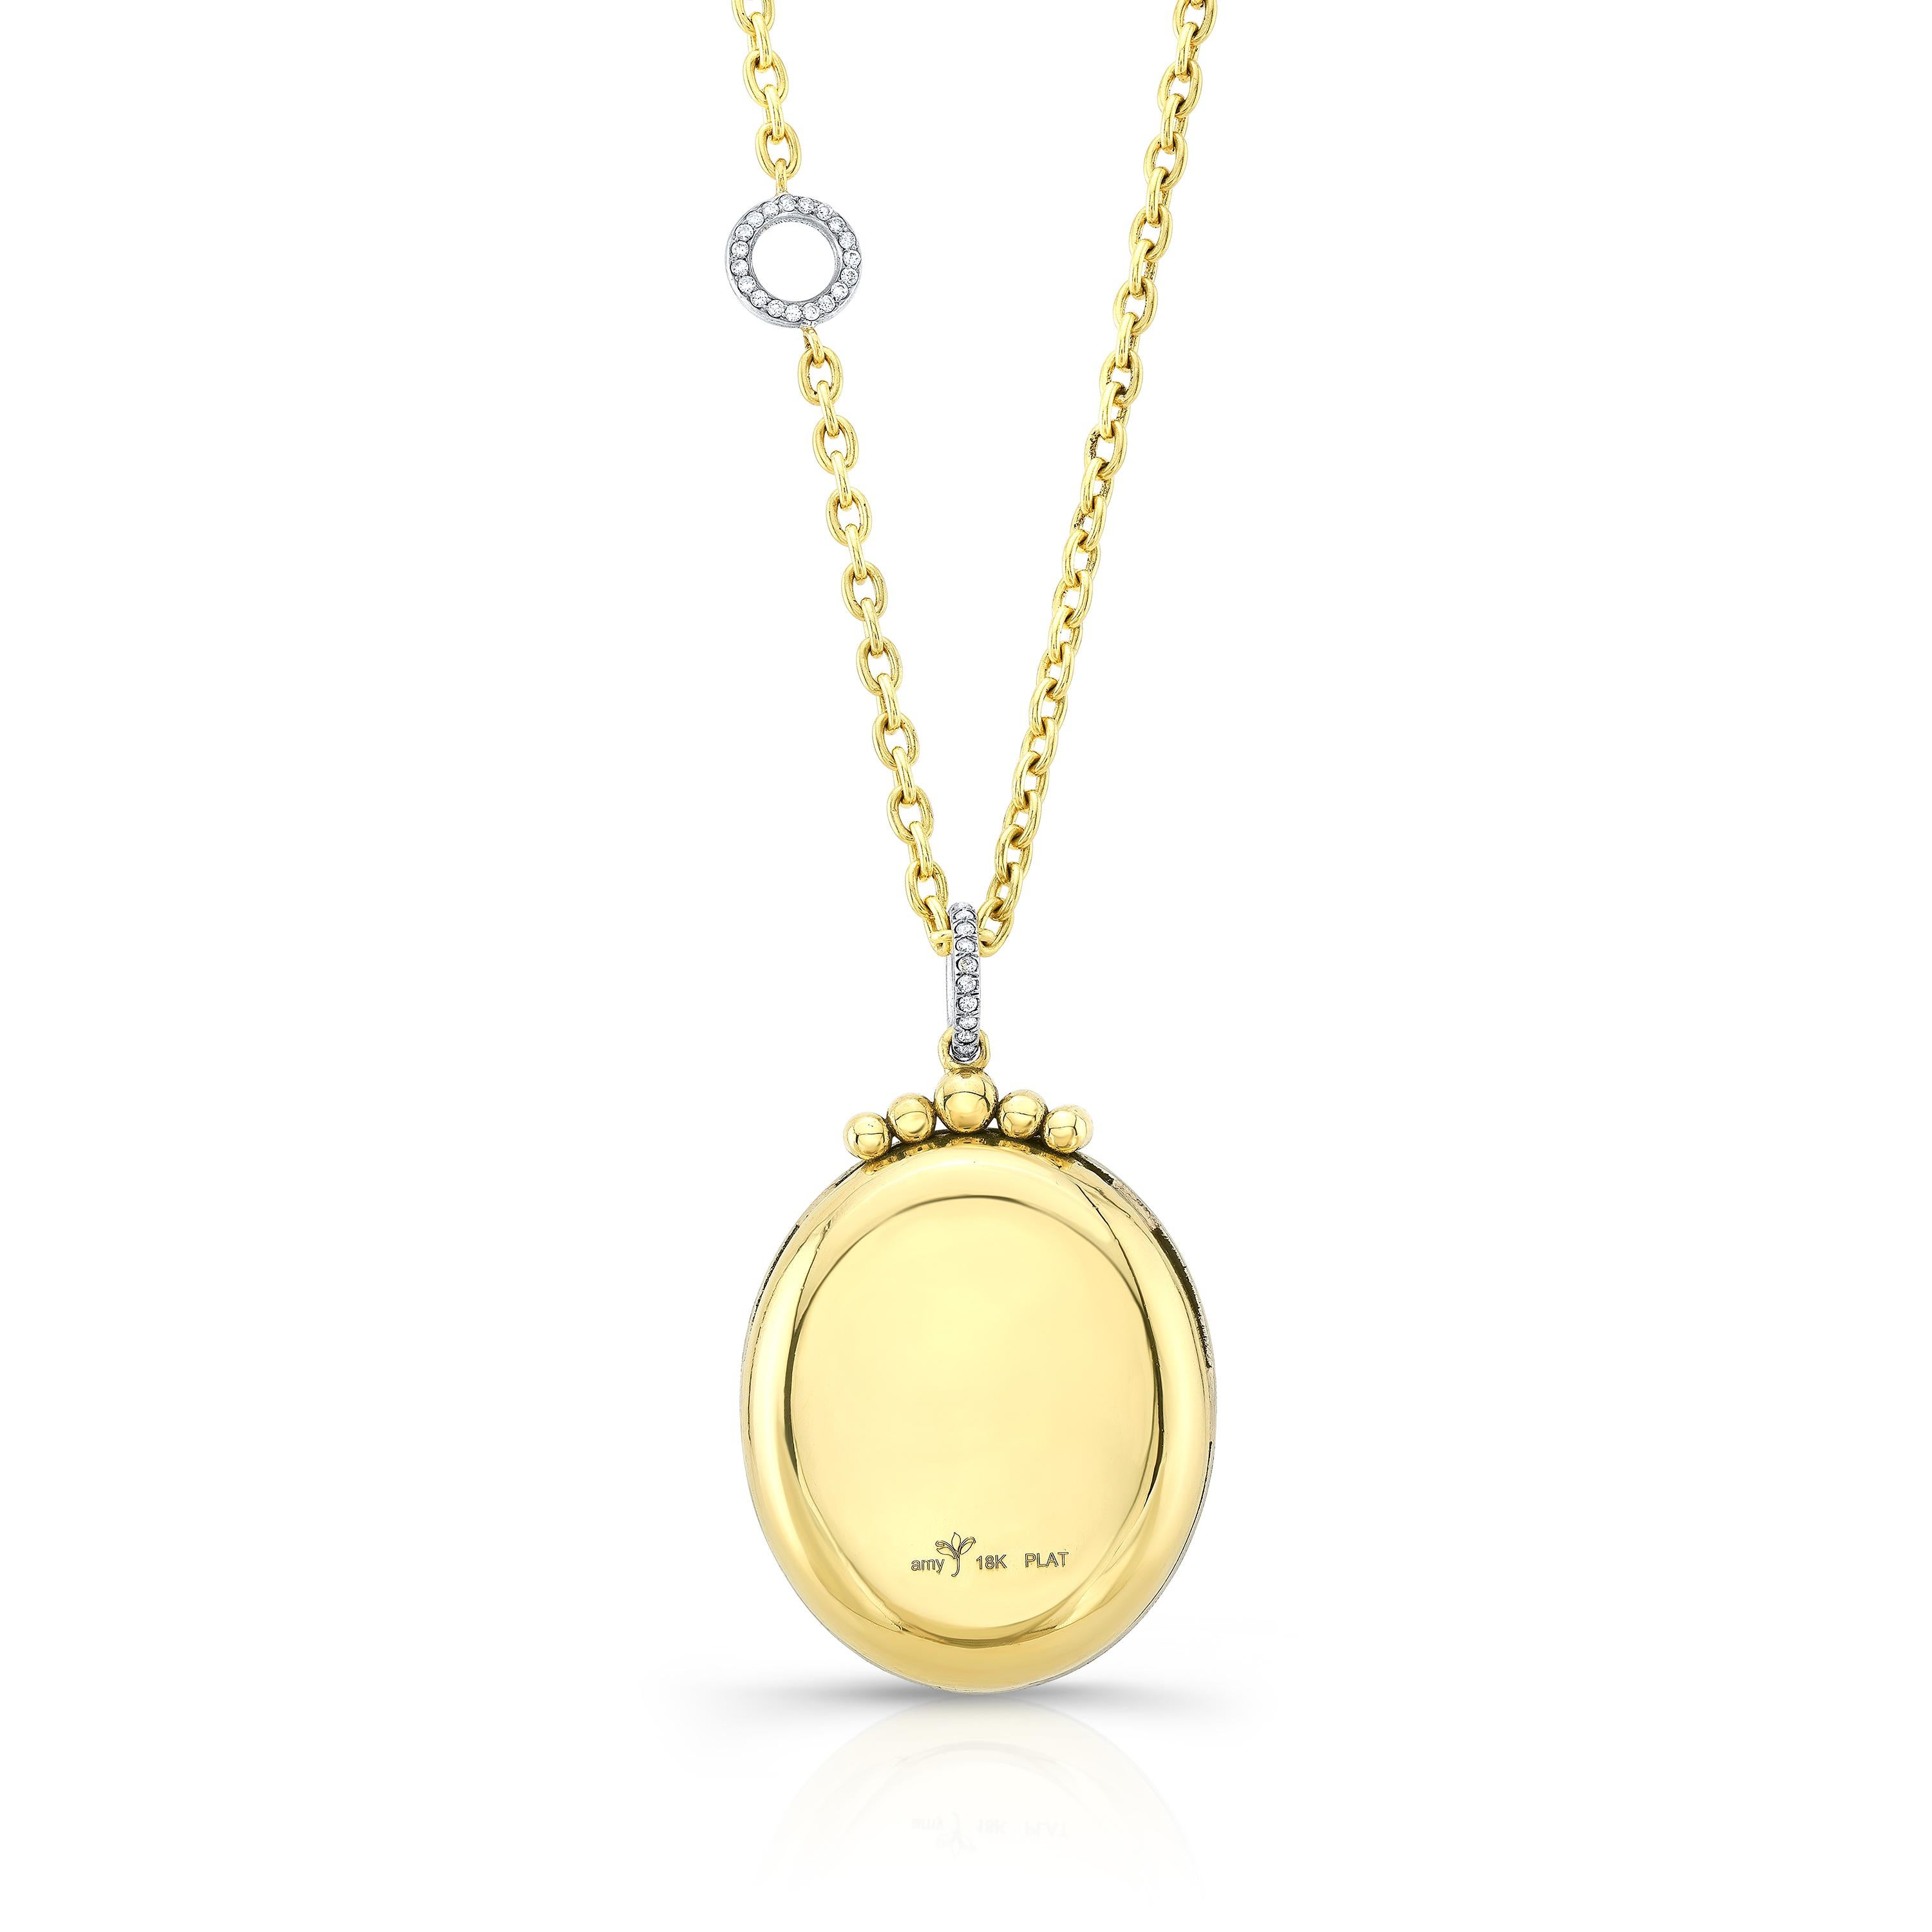 Amy Y's magnificent one-of-a-kind hand-carved citrine stone, diamond, sapphire, 18K-yellow gold, platinum and enamel pendant necklace is a genuine masterpiece. Her contemporary pendant necklace 'Ophelia' was designed with the natural wonders of